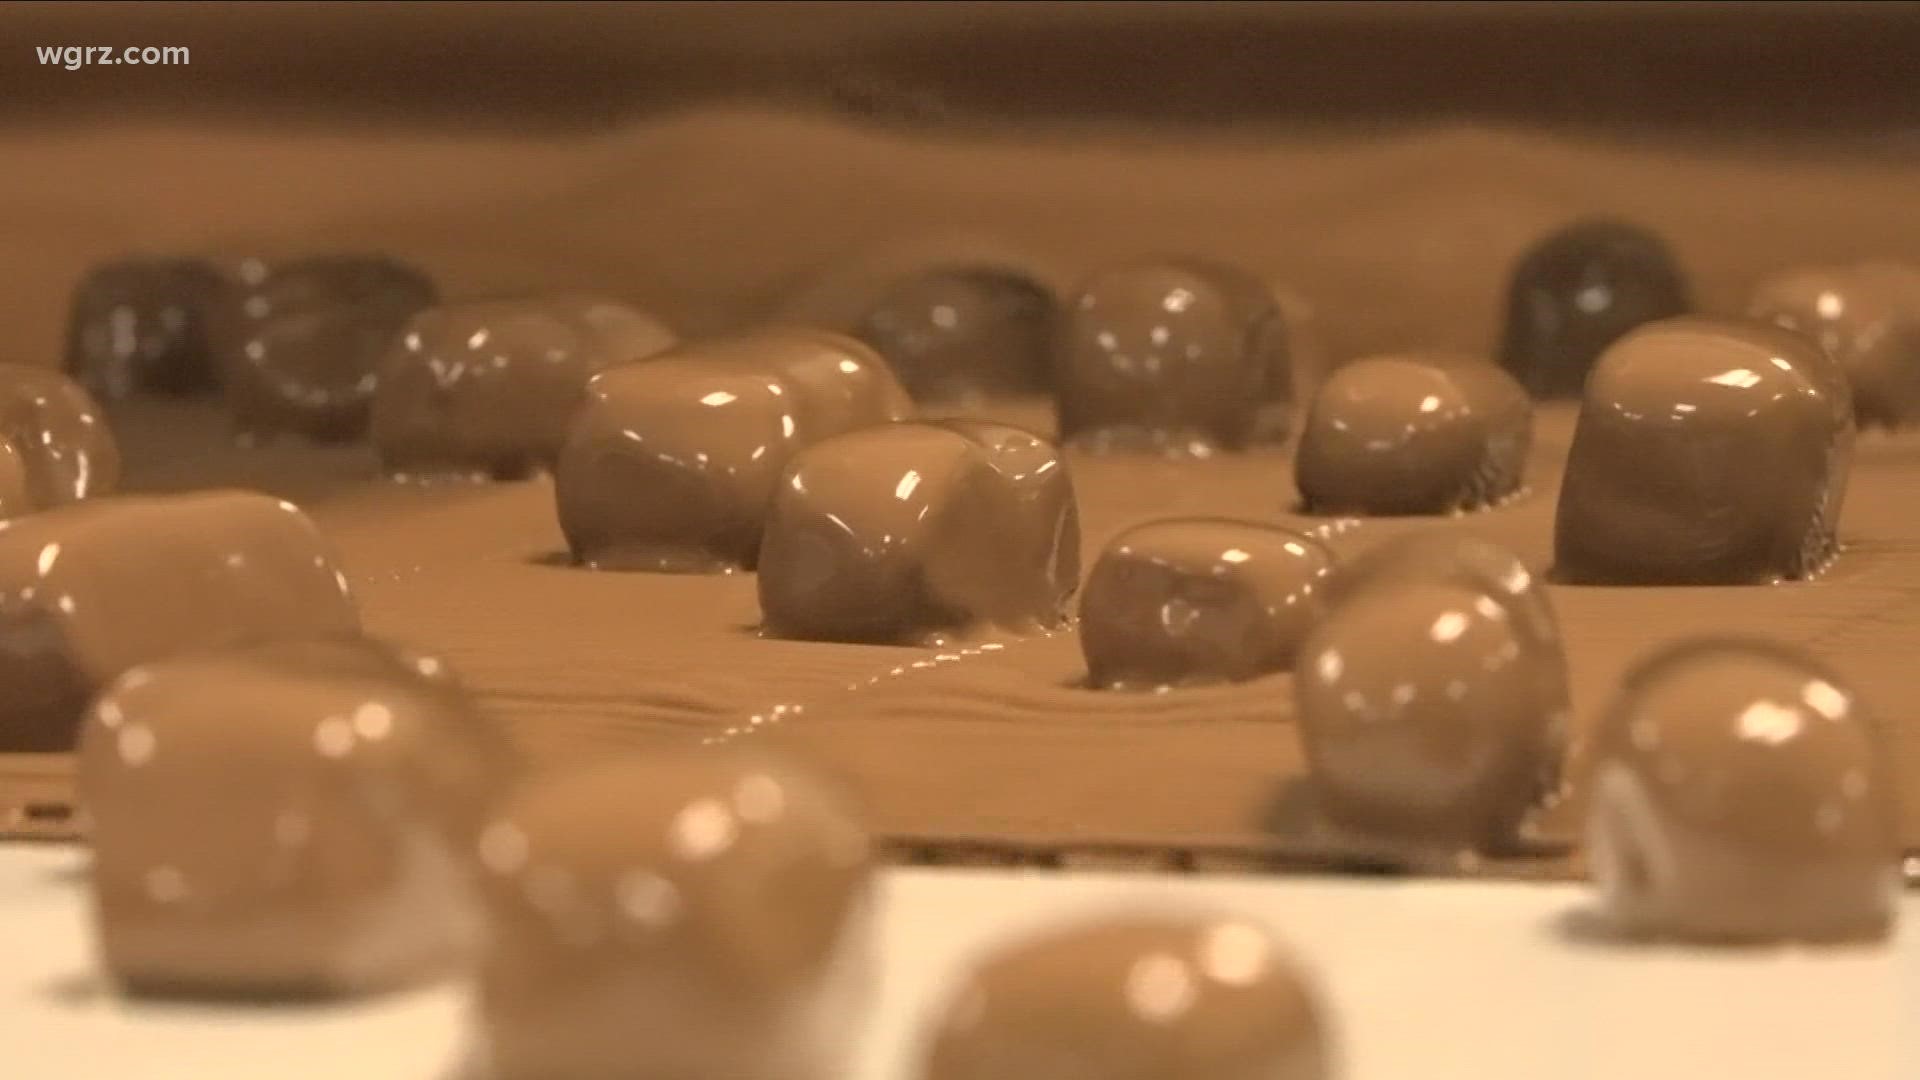 Sponge candy has been as much a Buffalo staple as chicken wings and beef on weck.